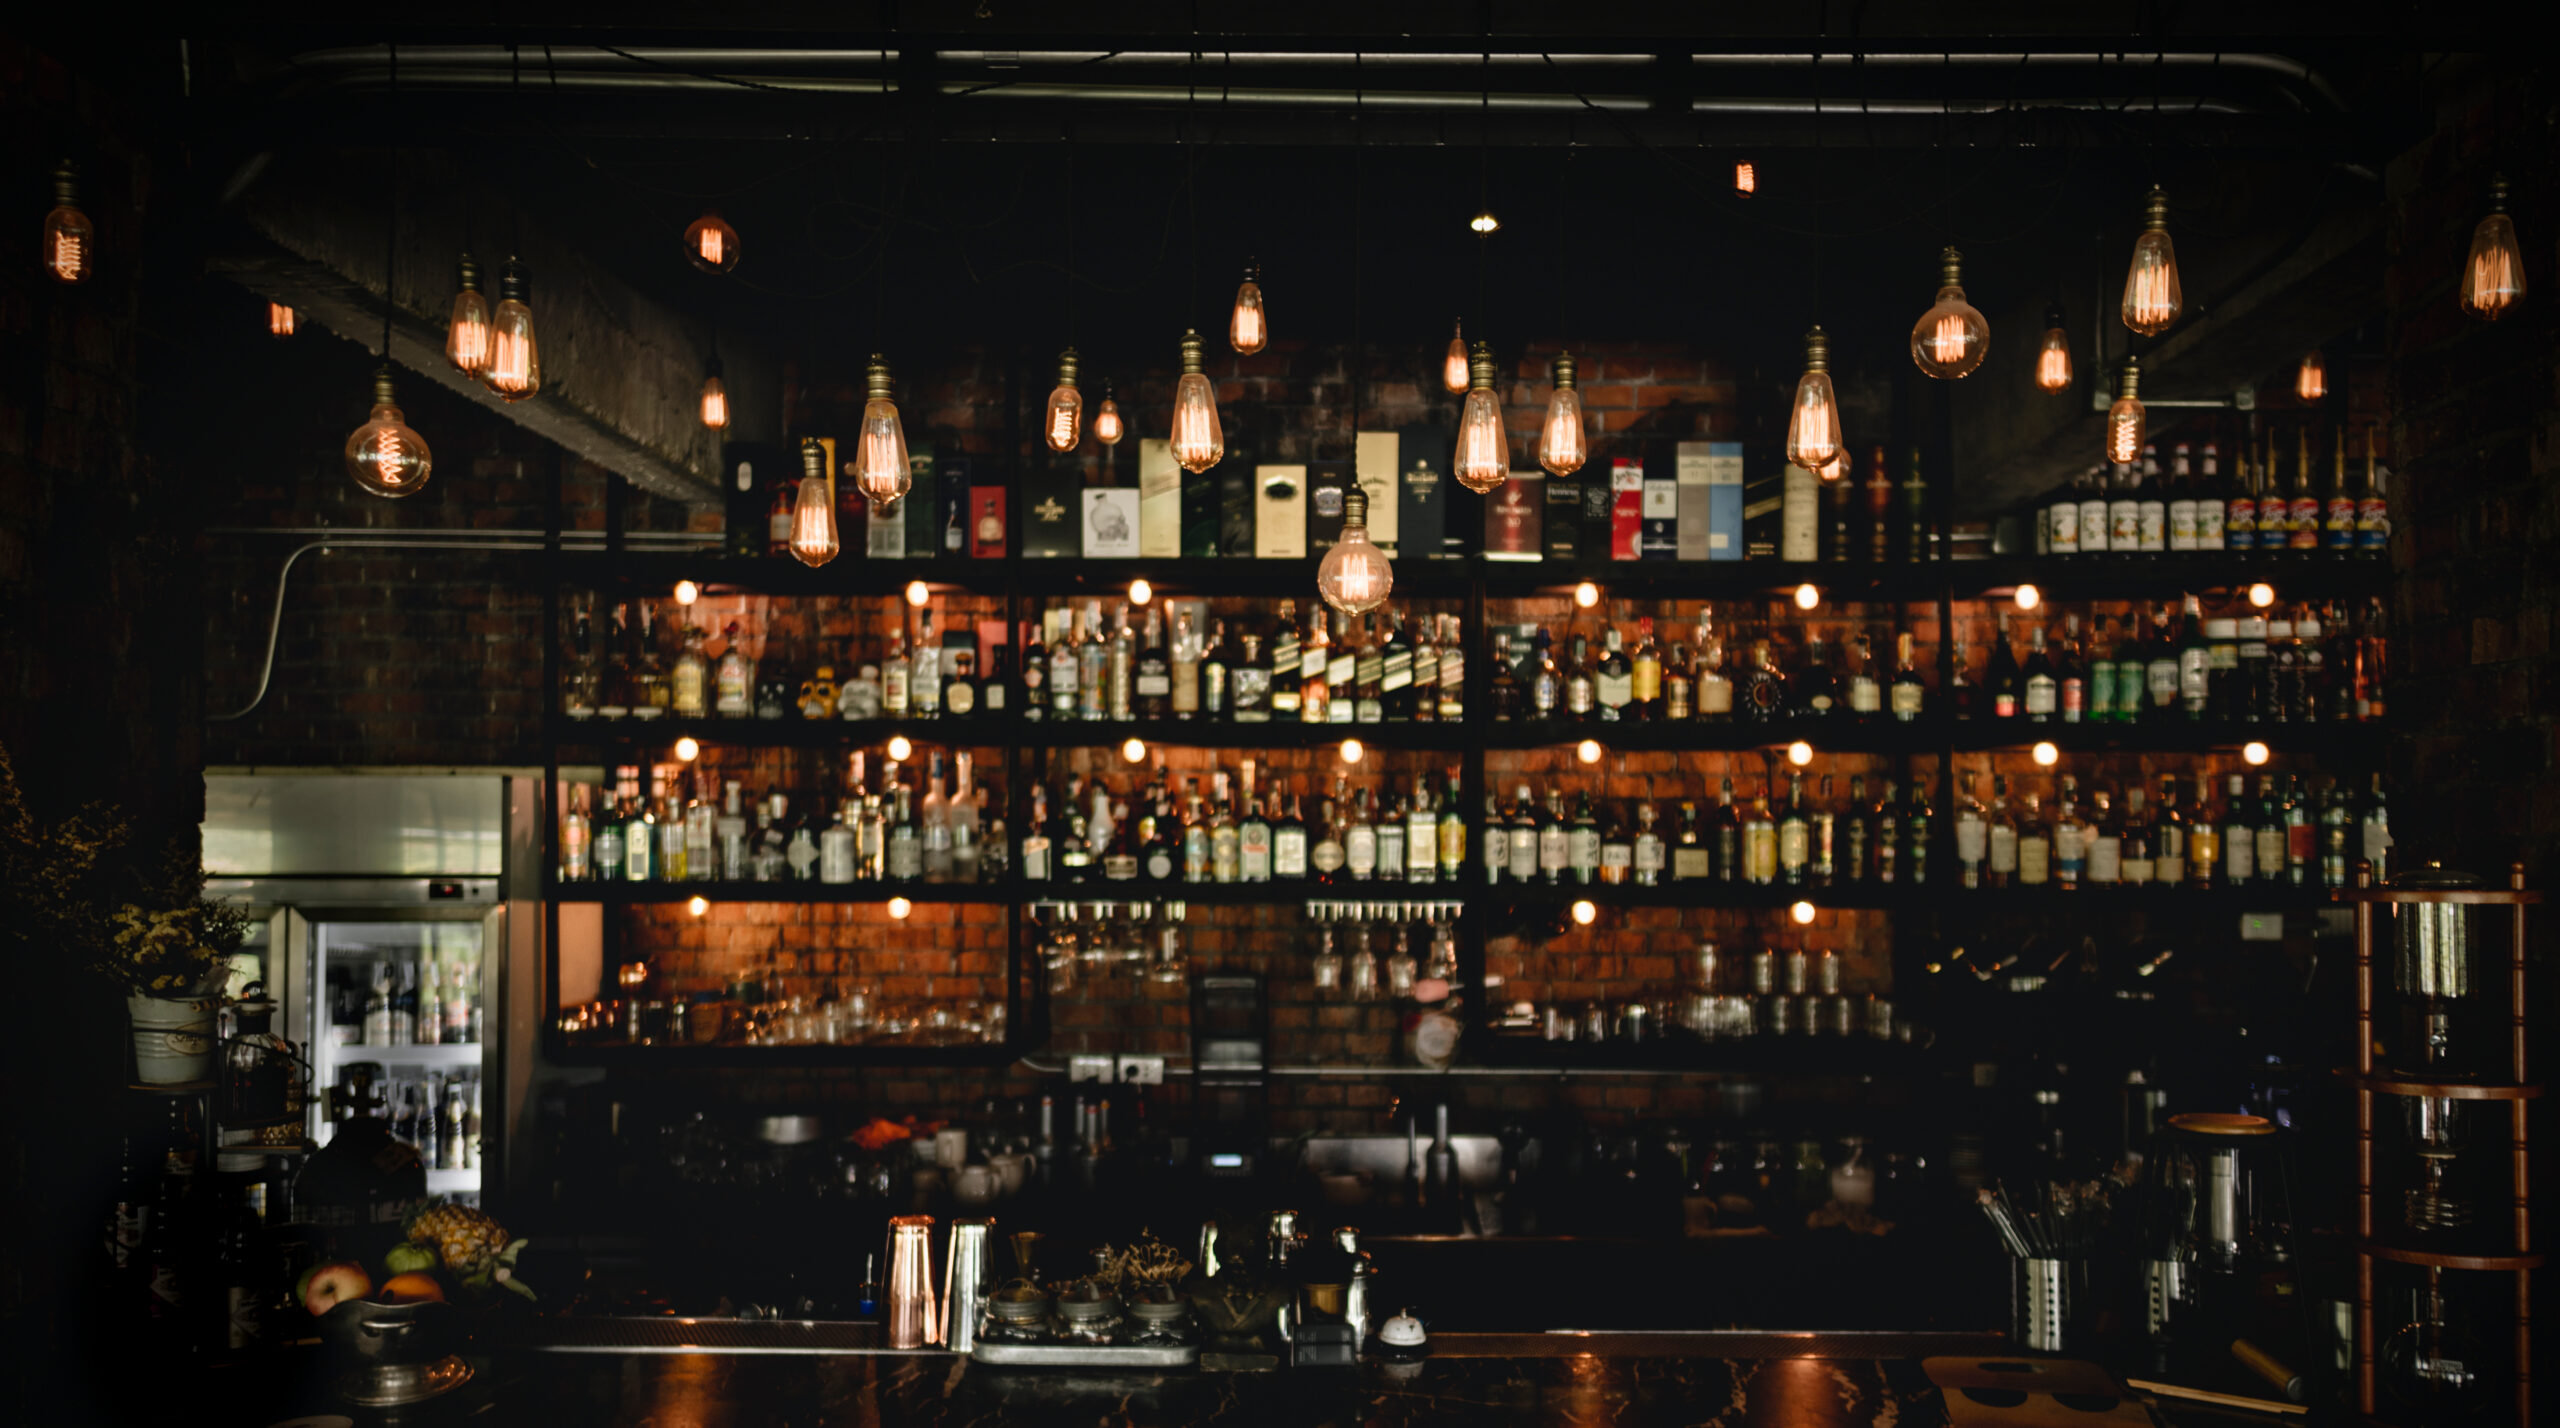 Vintage bar with Selection of Alcohol